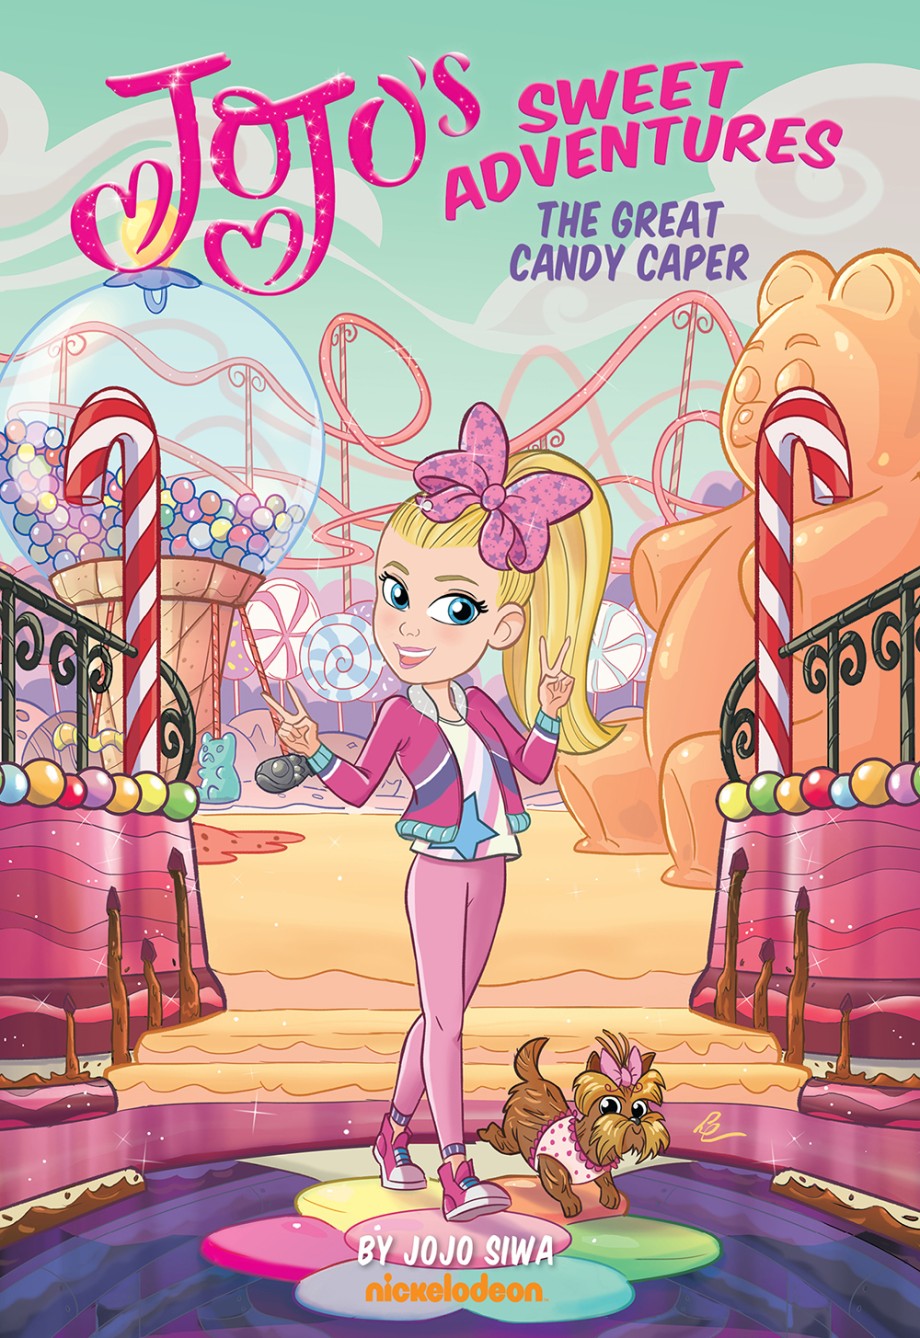 Great Candy Caper (JoJo's Sweet Adventures) A Graphic Novel